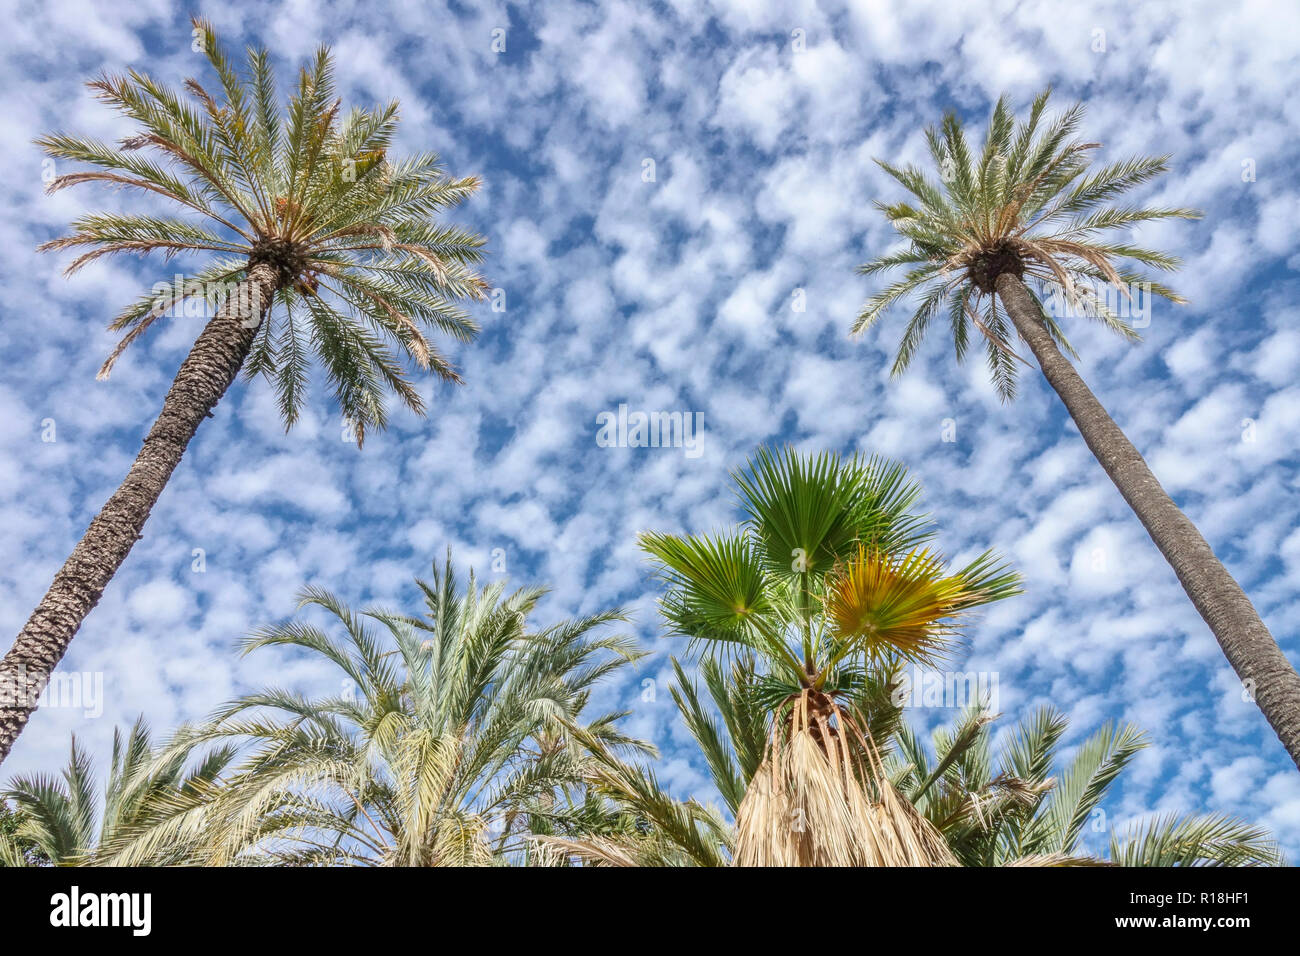 Spain, Elche, Palm trees blue sky and clouds famous touristic place, palmeral bottom view Stock Photo